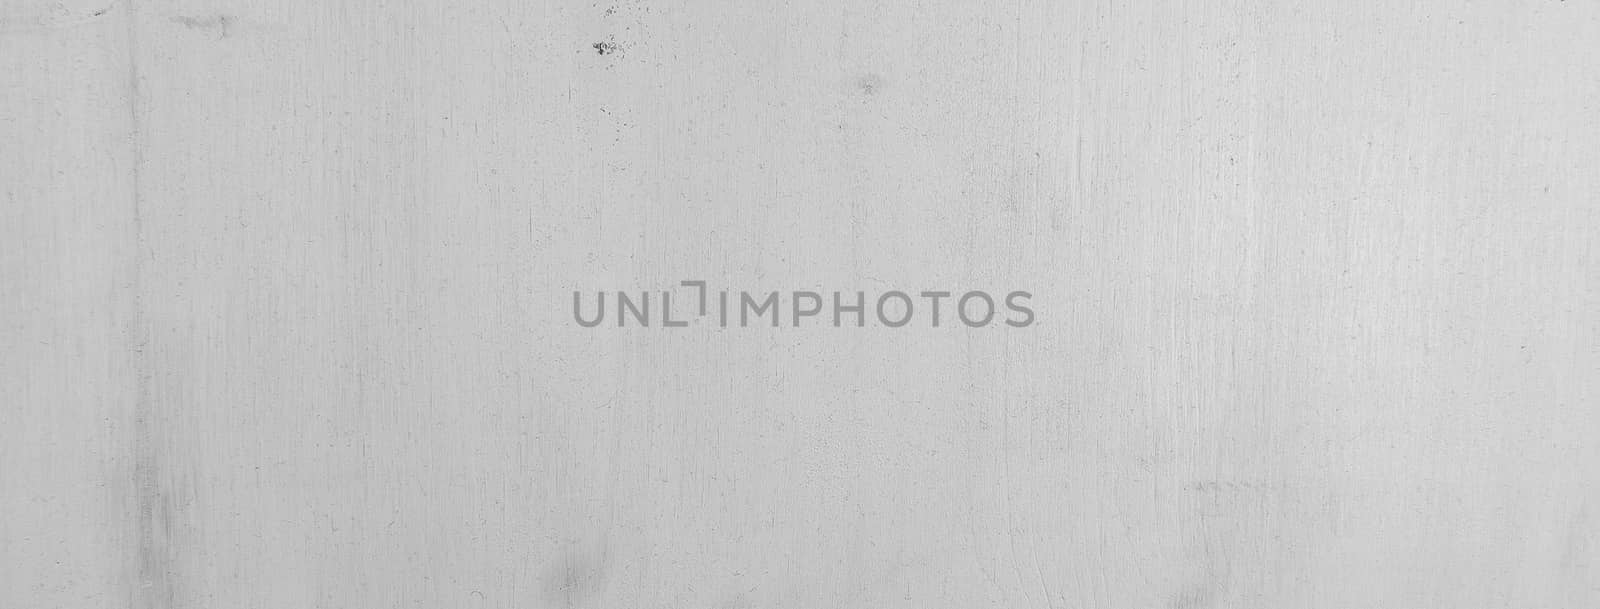 Texture of a white wooden board by marcorubino